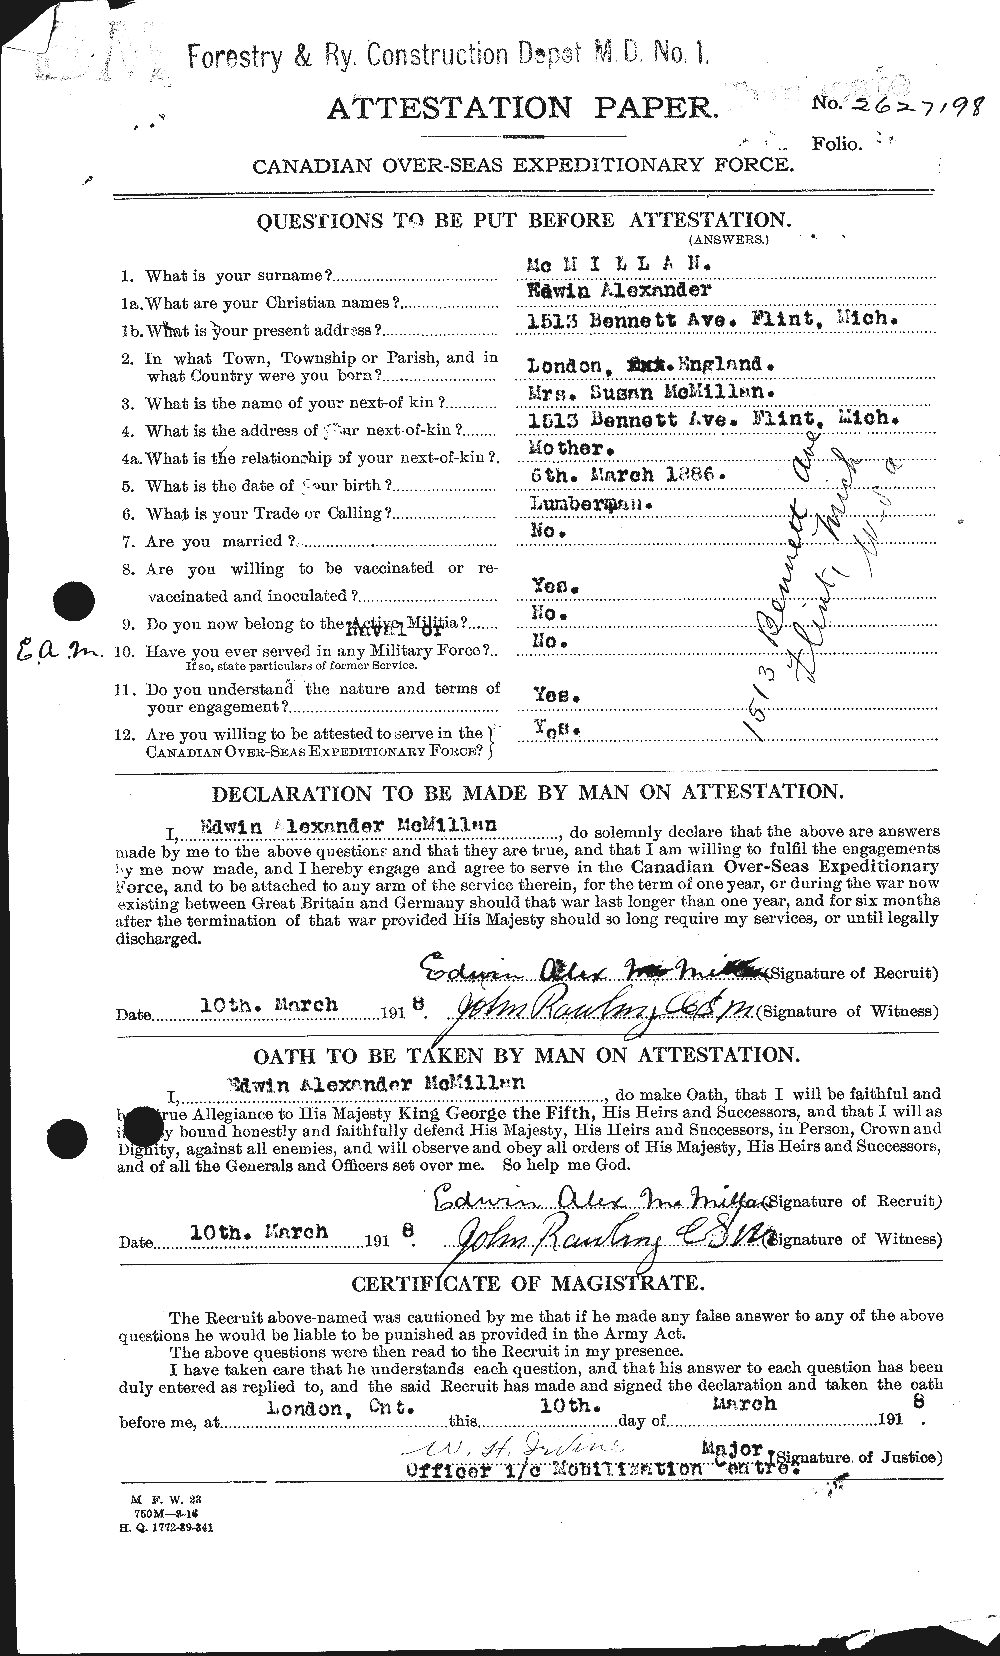 Personnel Records of the First World War - CEF 537676a